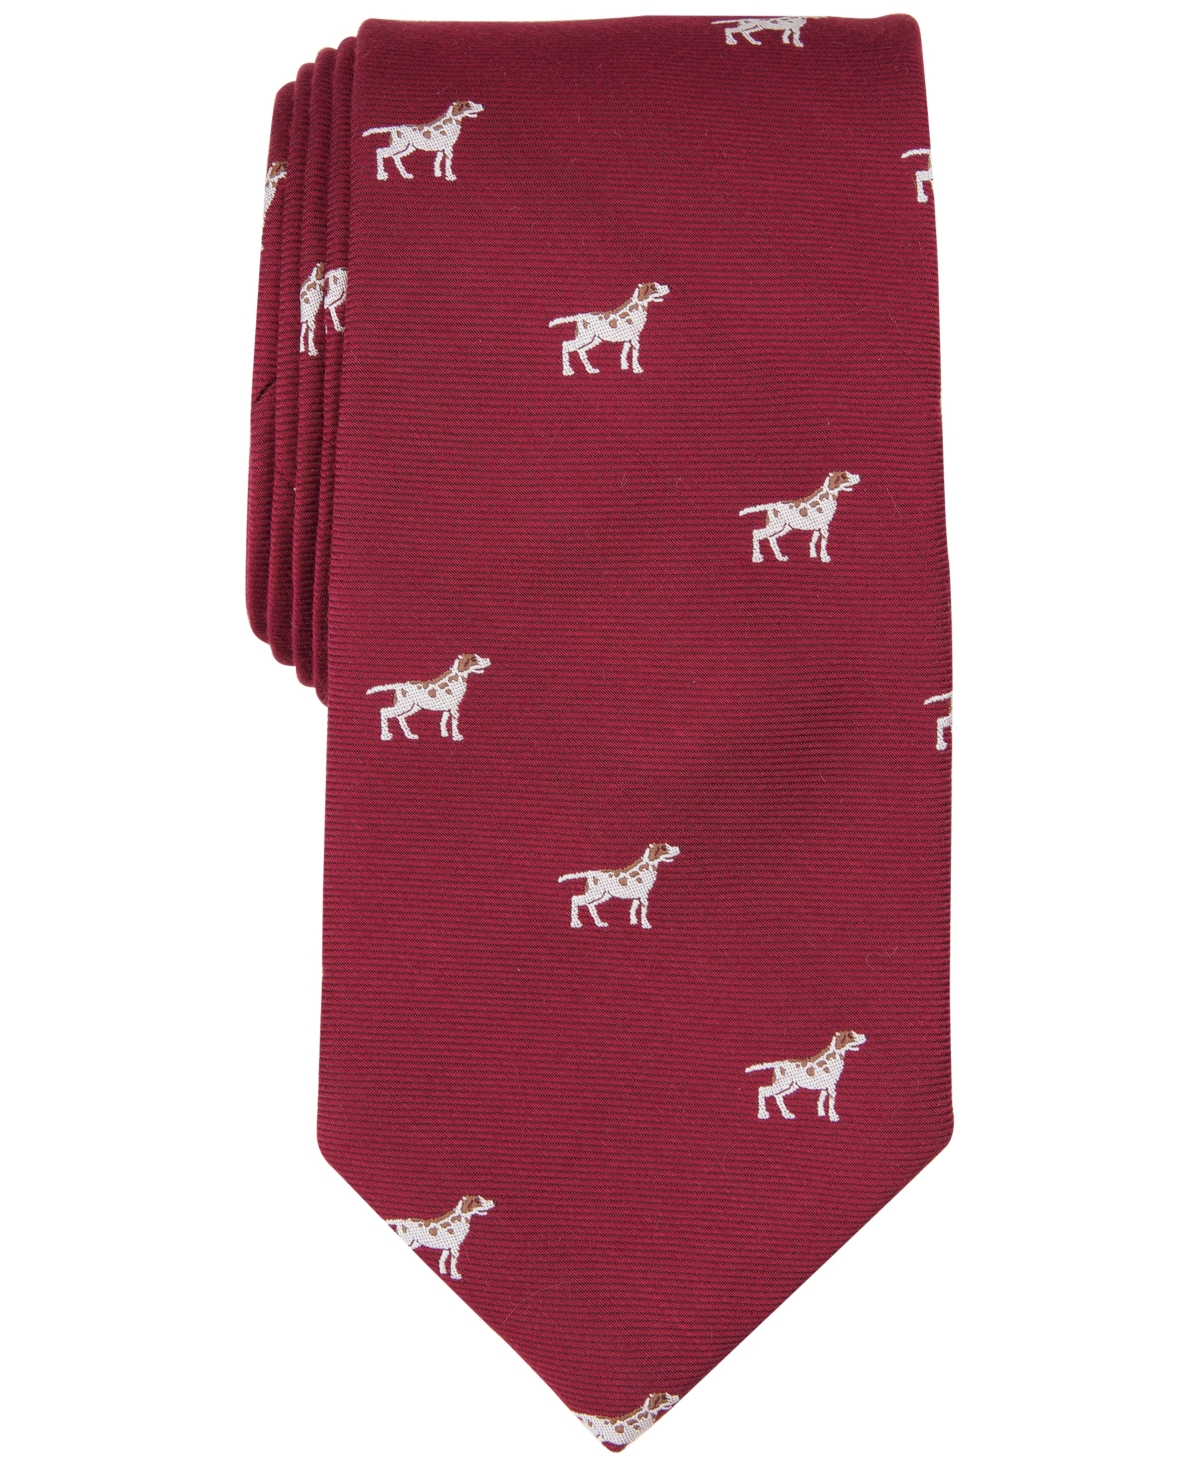 Men's Monterey Dog-Pattern Tie, Created for Macy's - Red